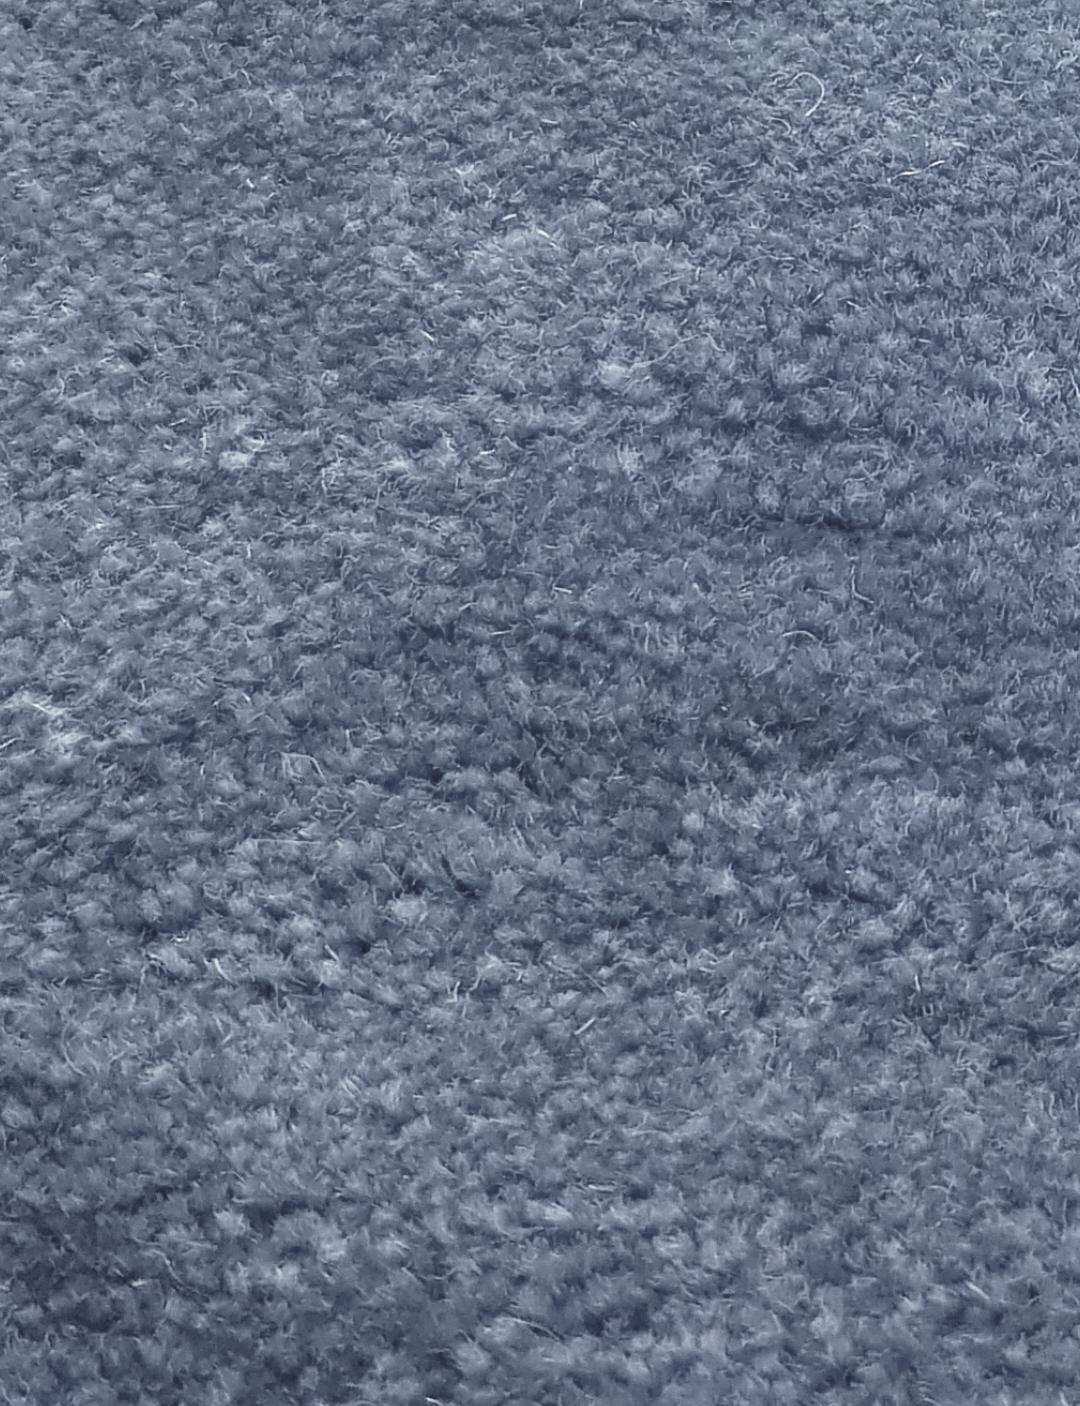 Hand-Crafted Foil Balloon Contemporary Handknotted Wool Rug Rankin Rugs, 'Silver/Grey/Blue' For Sale